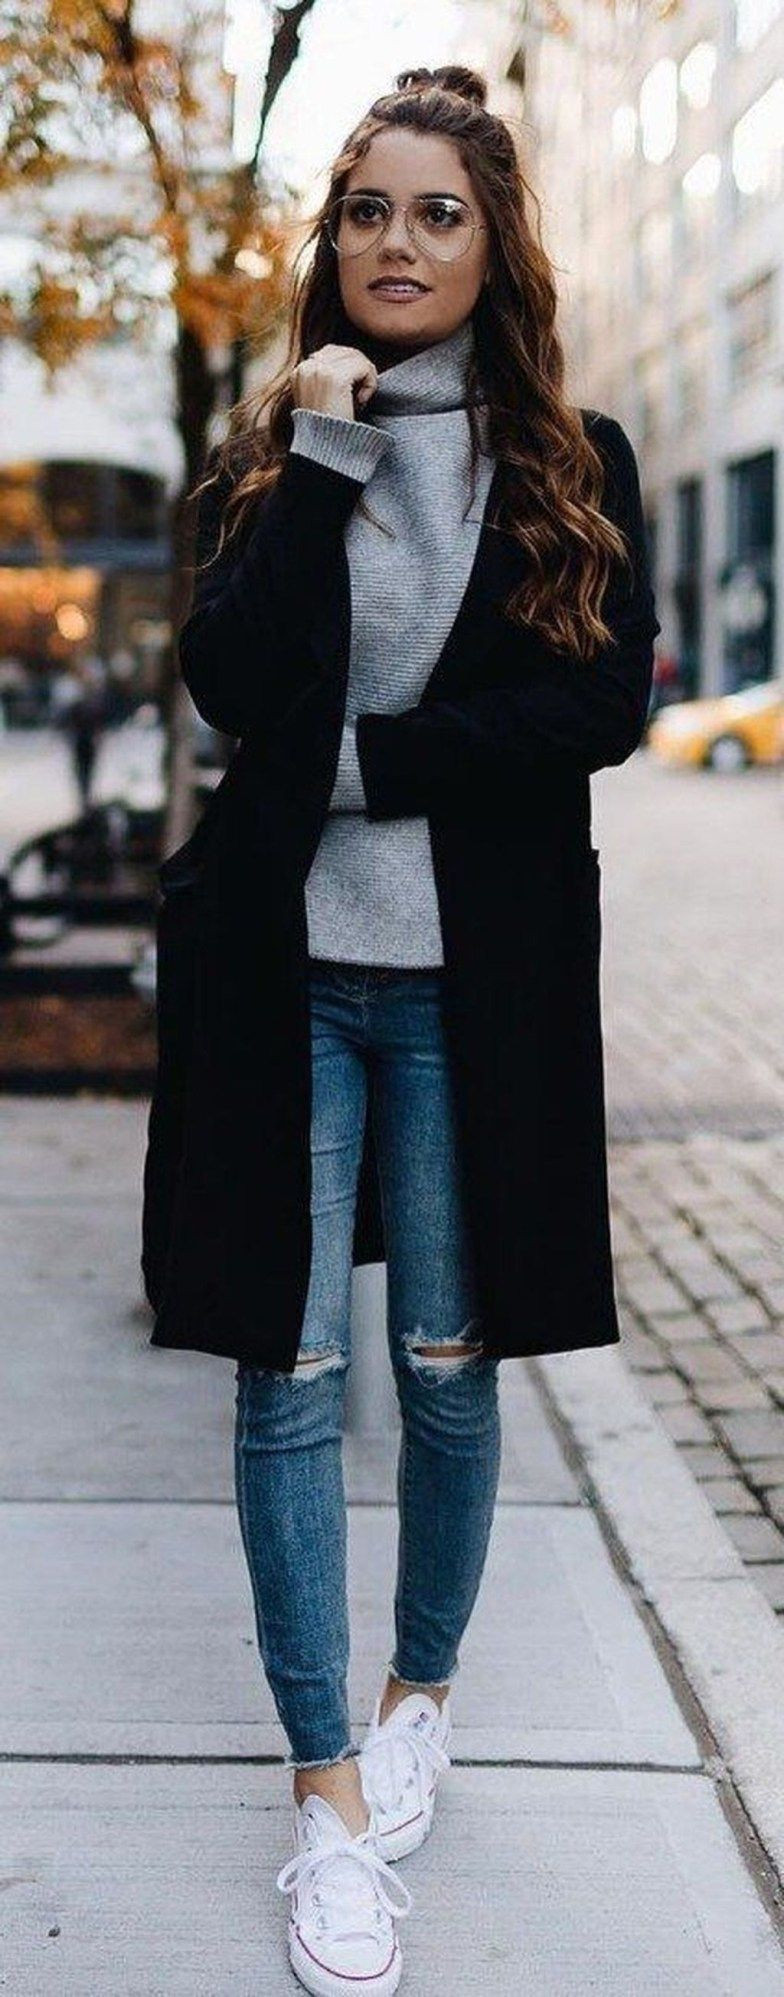 Women Winter Outfit Ideas
 Best casual winter outfit ideas 2018 for women 26